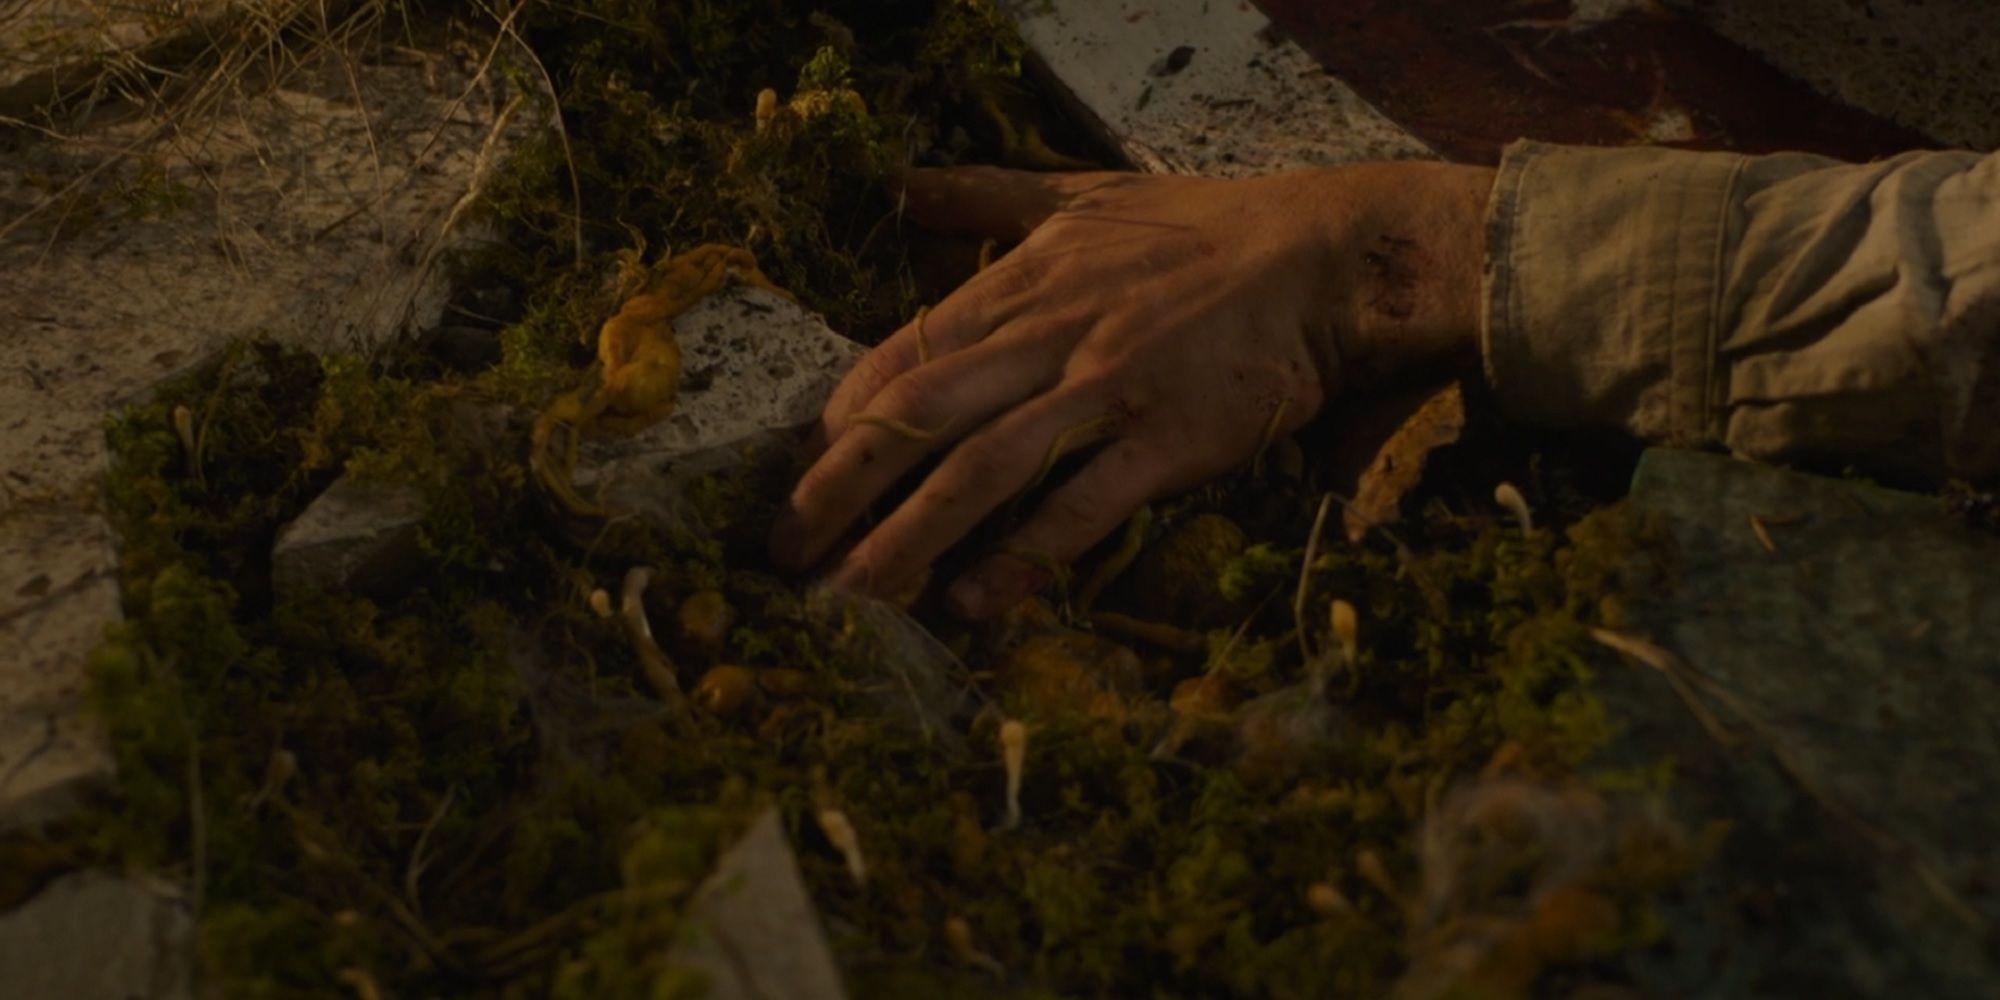 The Last Of Us Episode 2 cordyceps roots